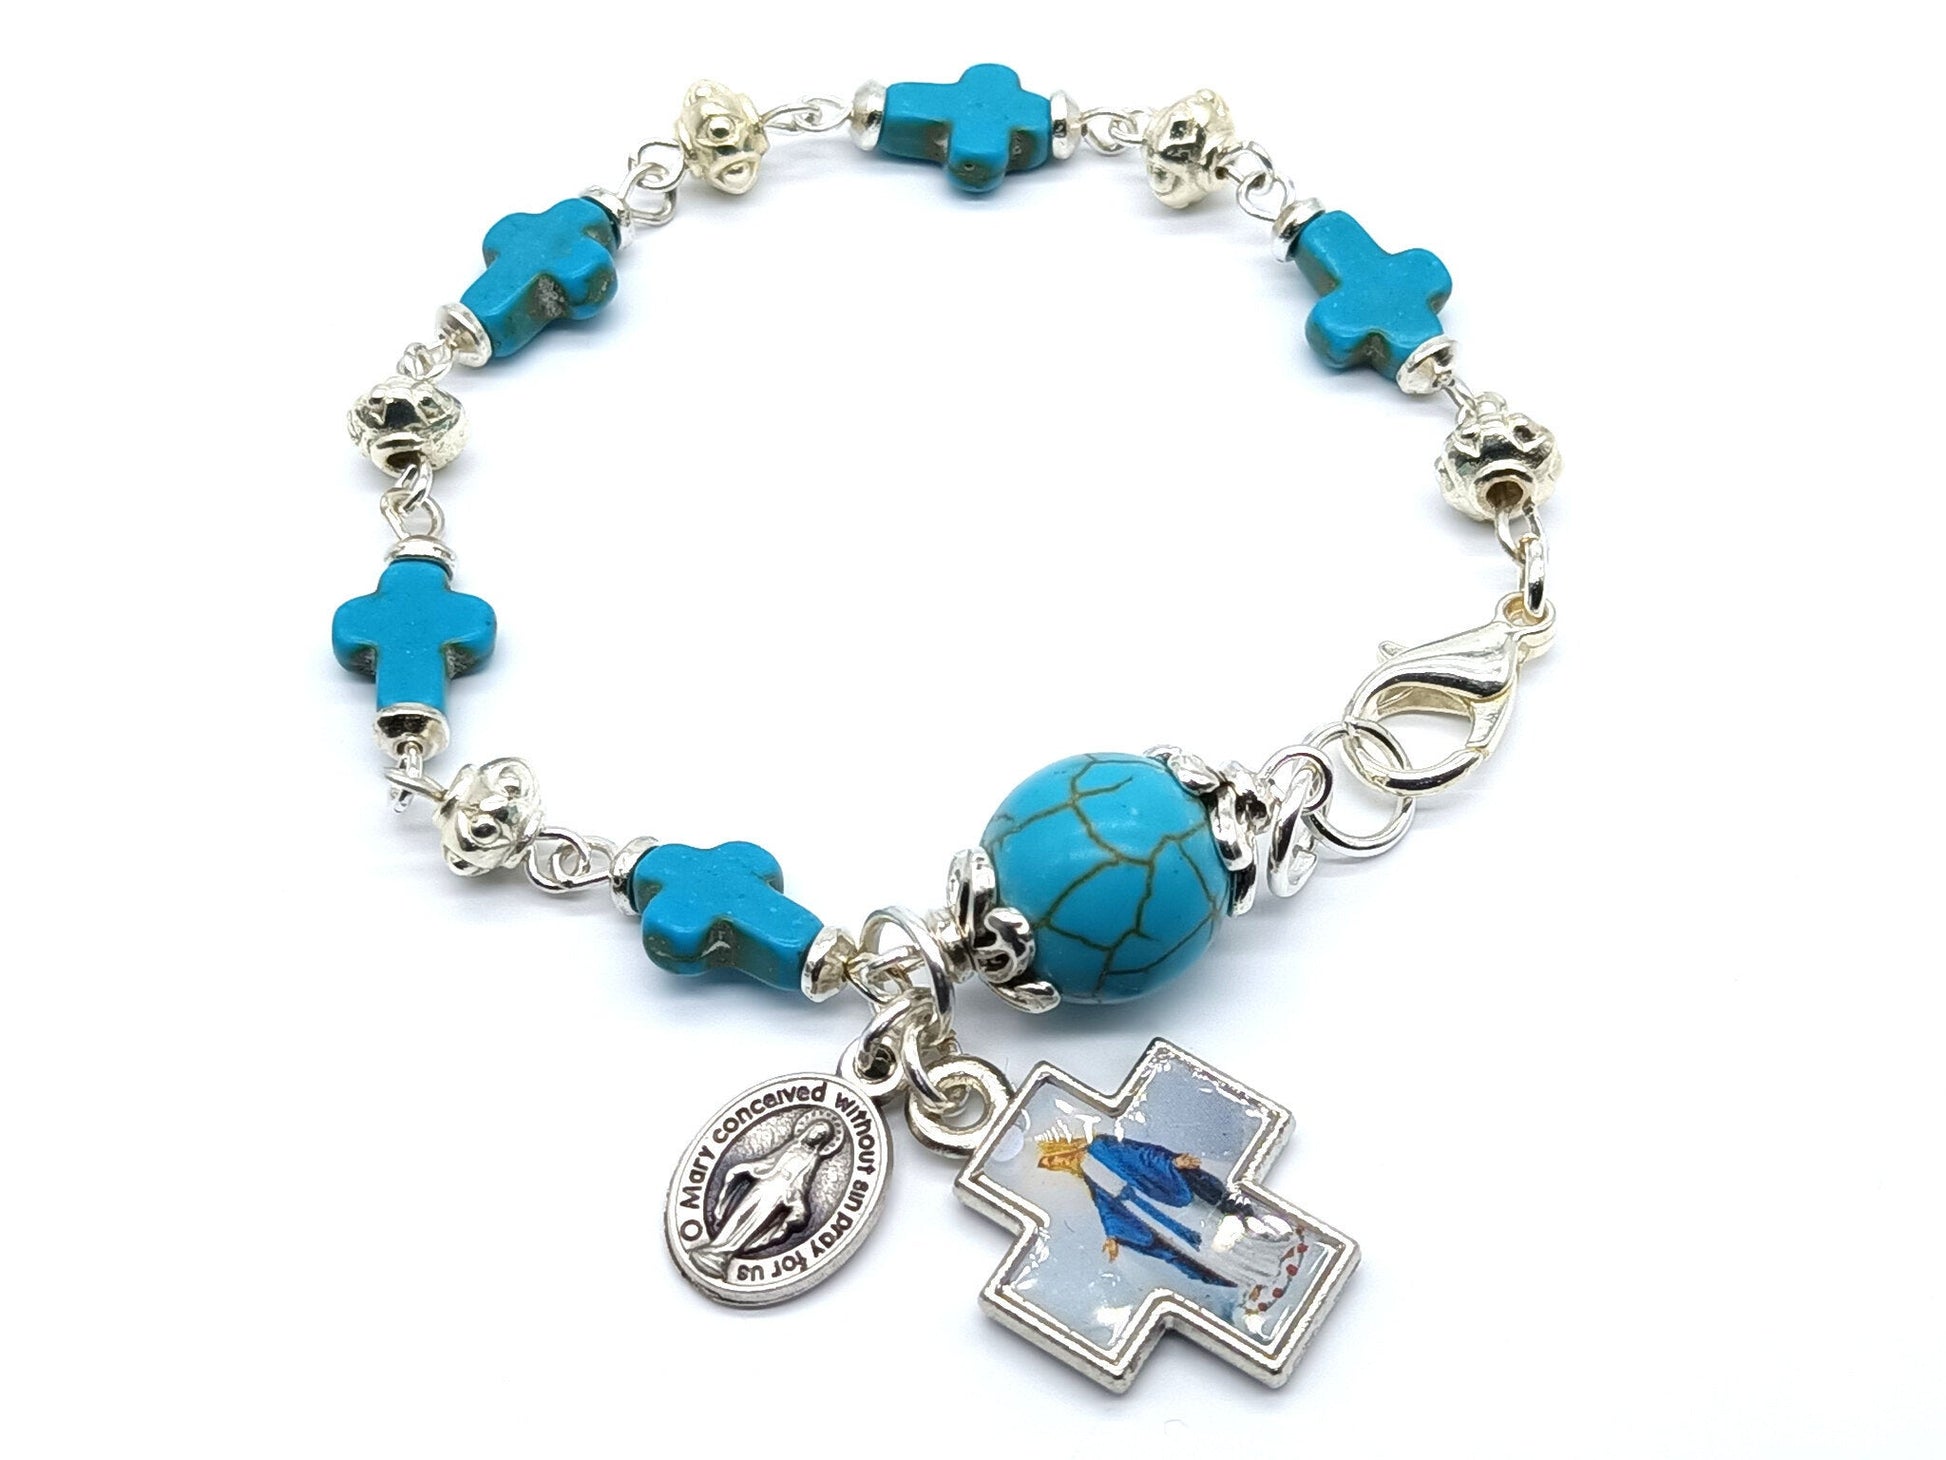 Our Lady of Grace unique rosary beads single decade bracelet with turquoise gemstone beads, silver medals and lobster clasp.